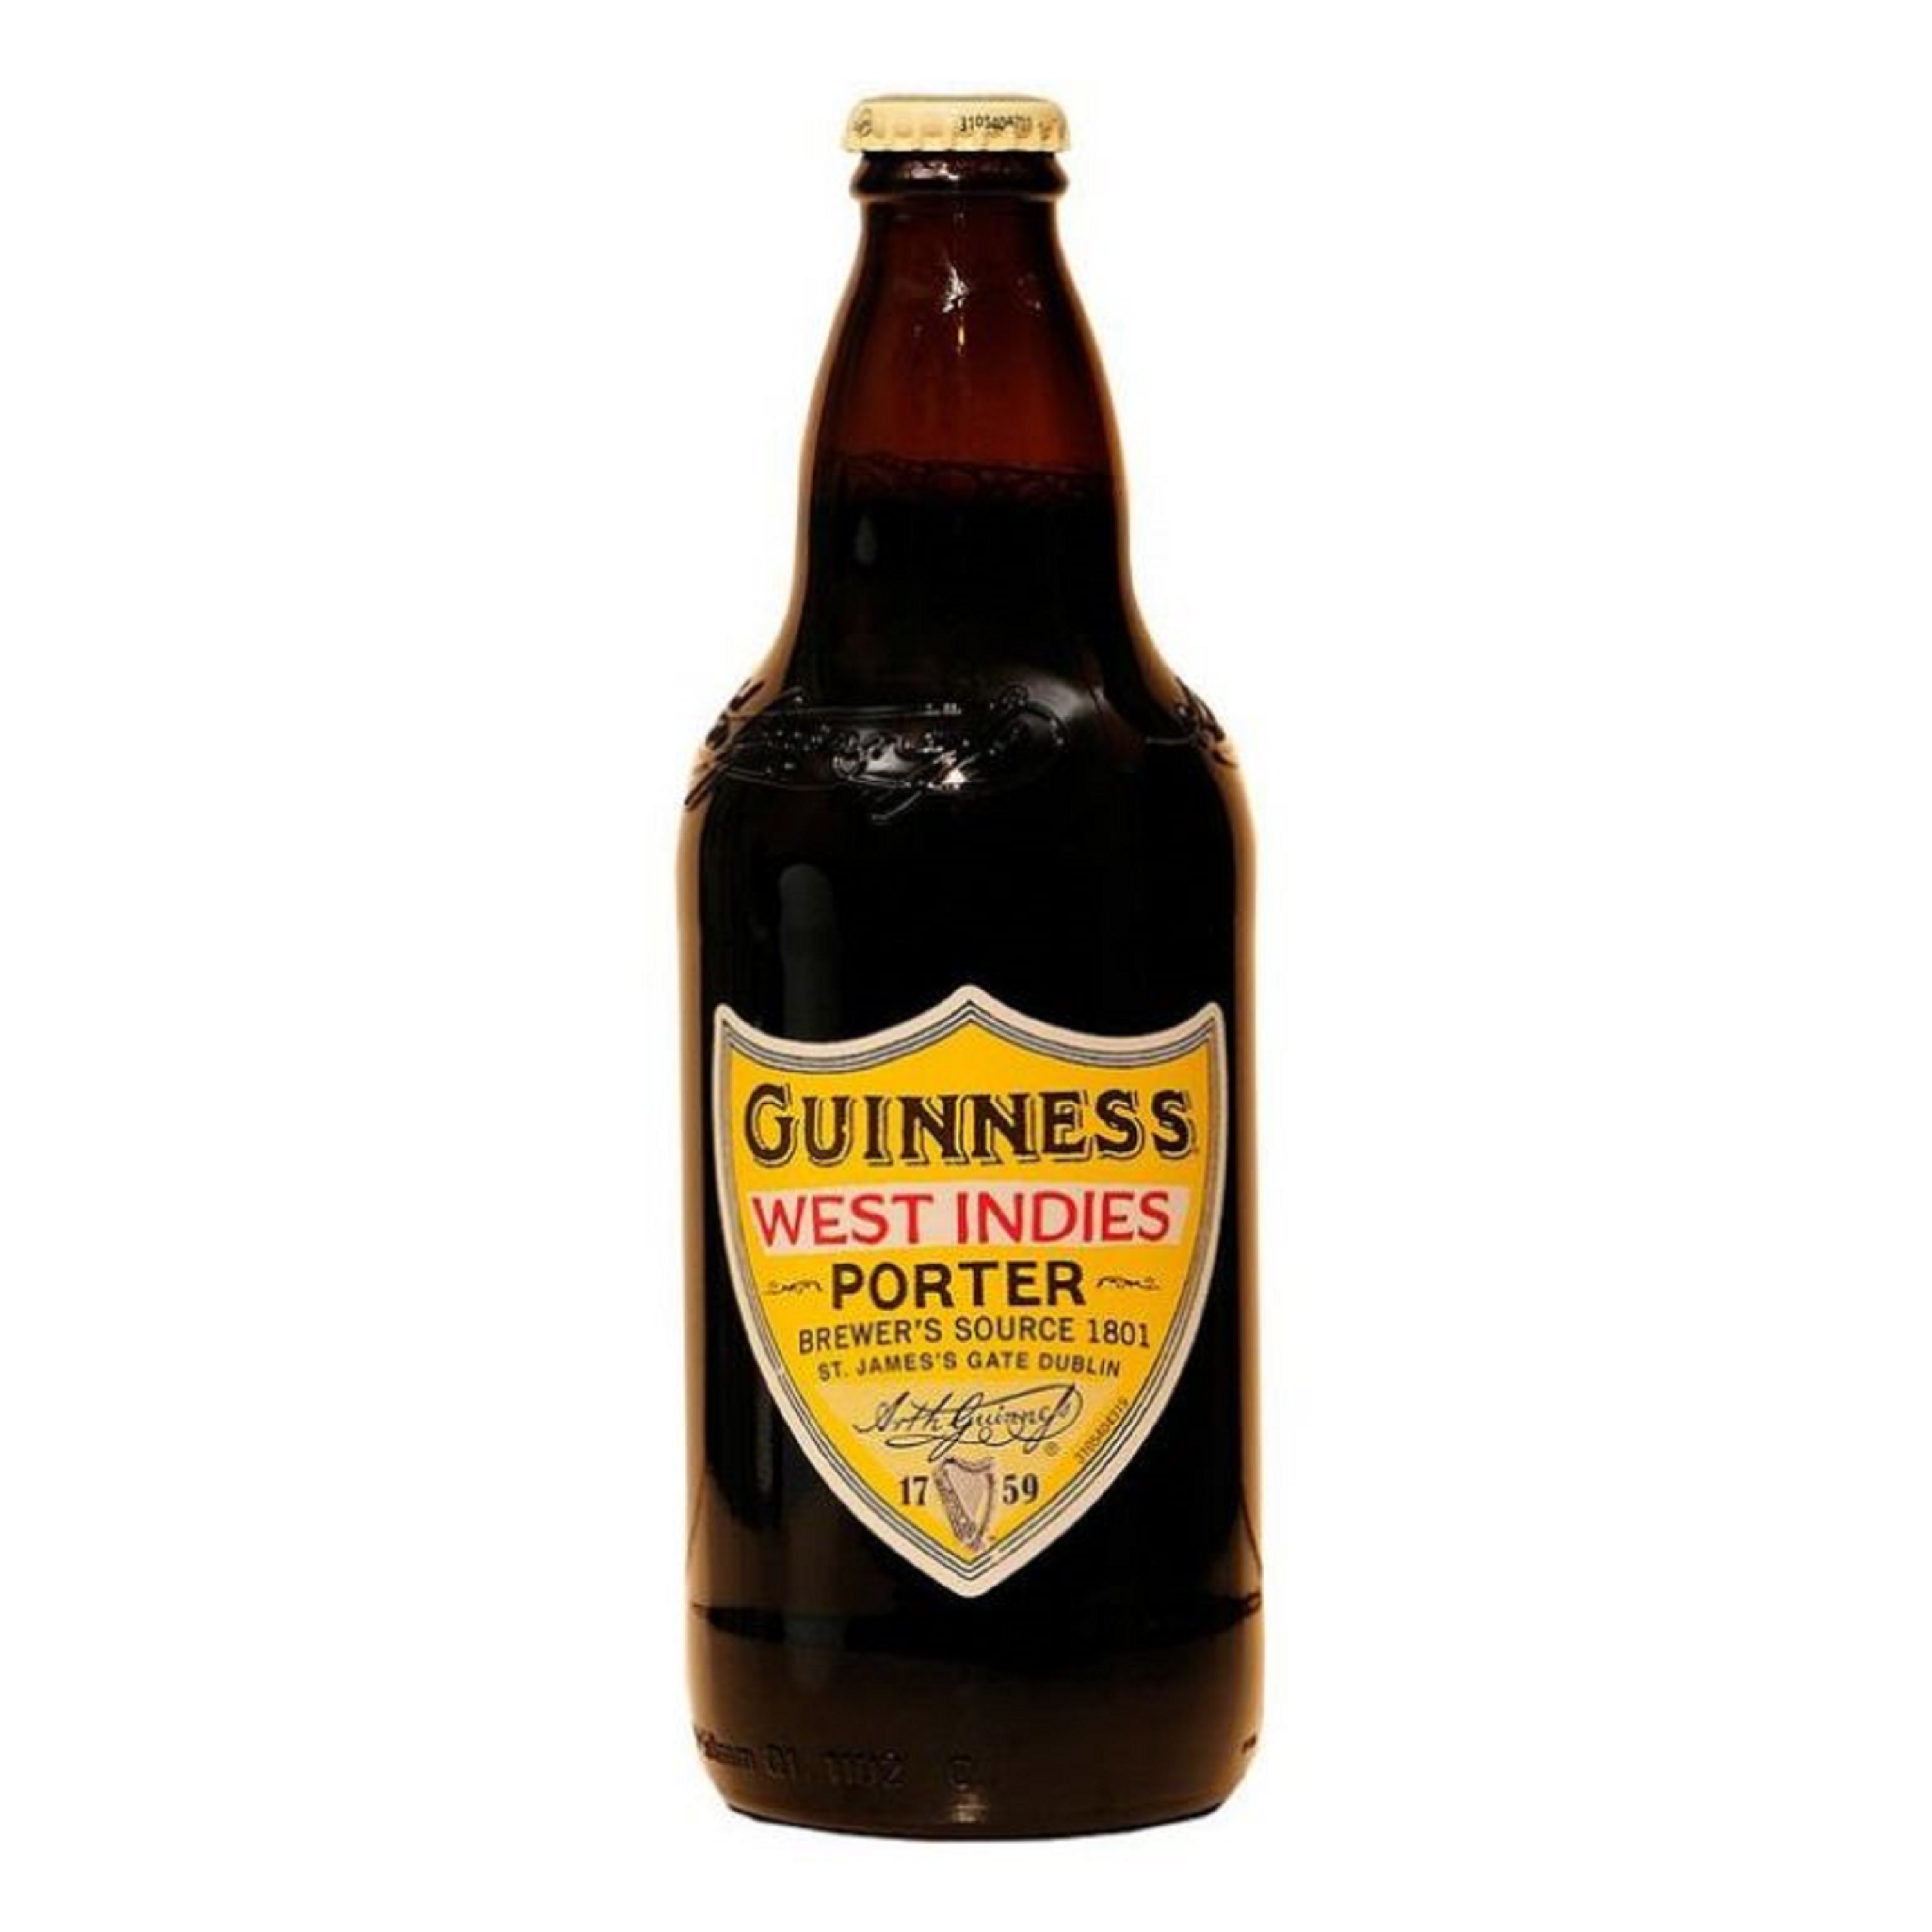 GUINNESS WEST INDIES PORTER